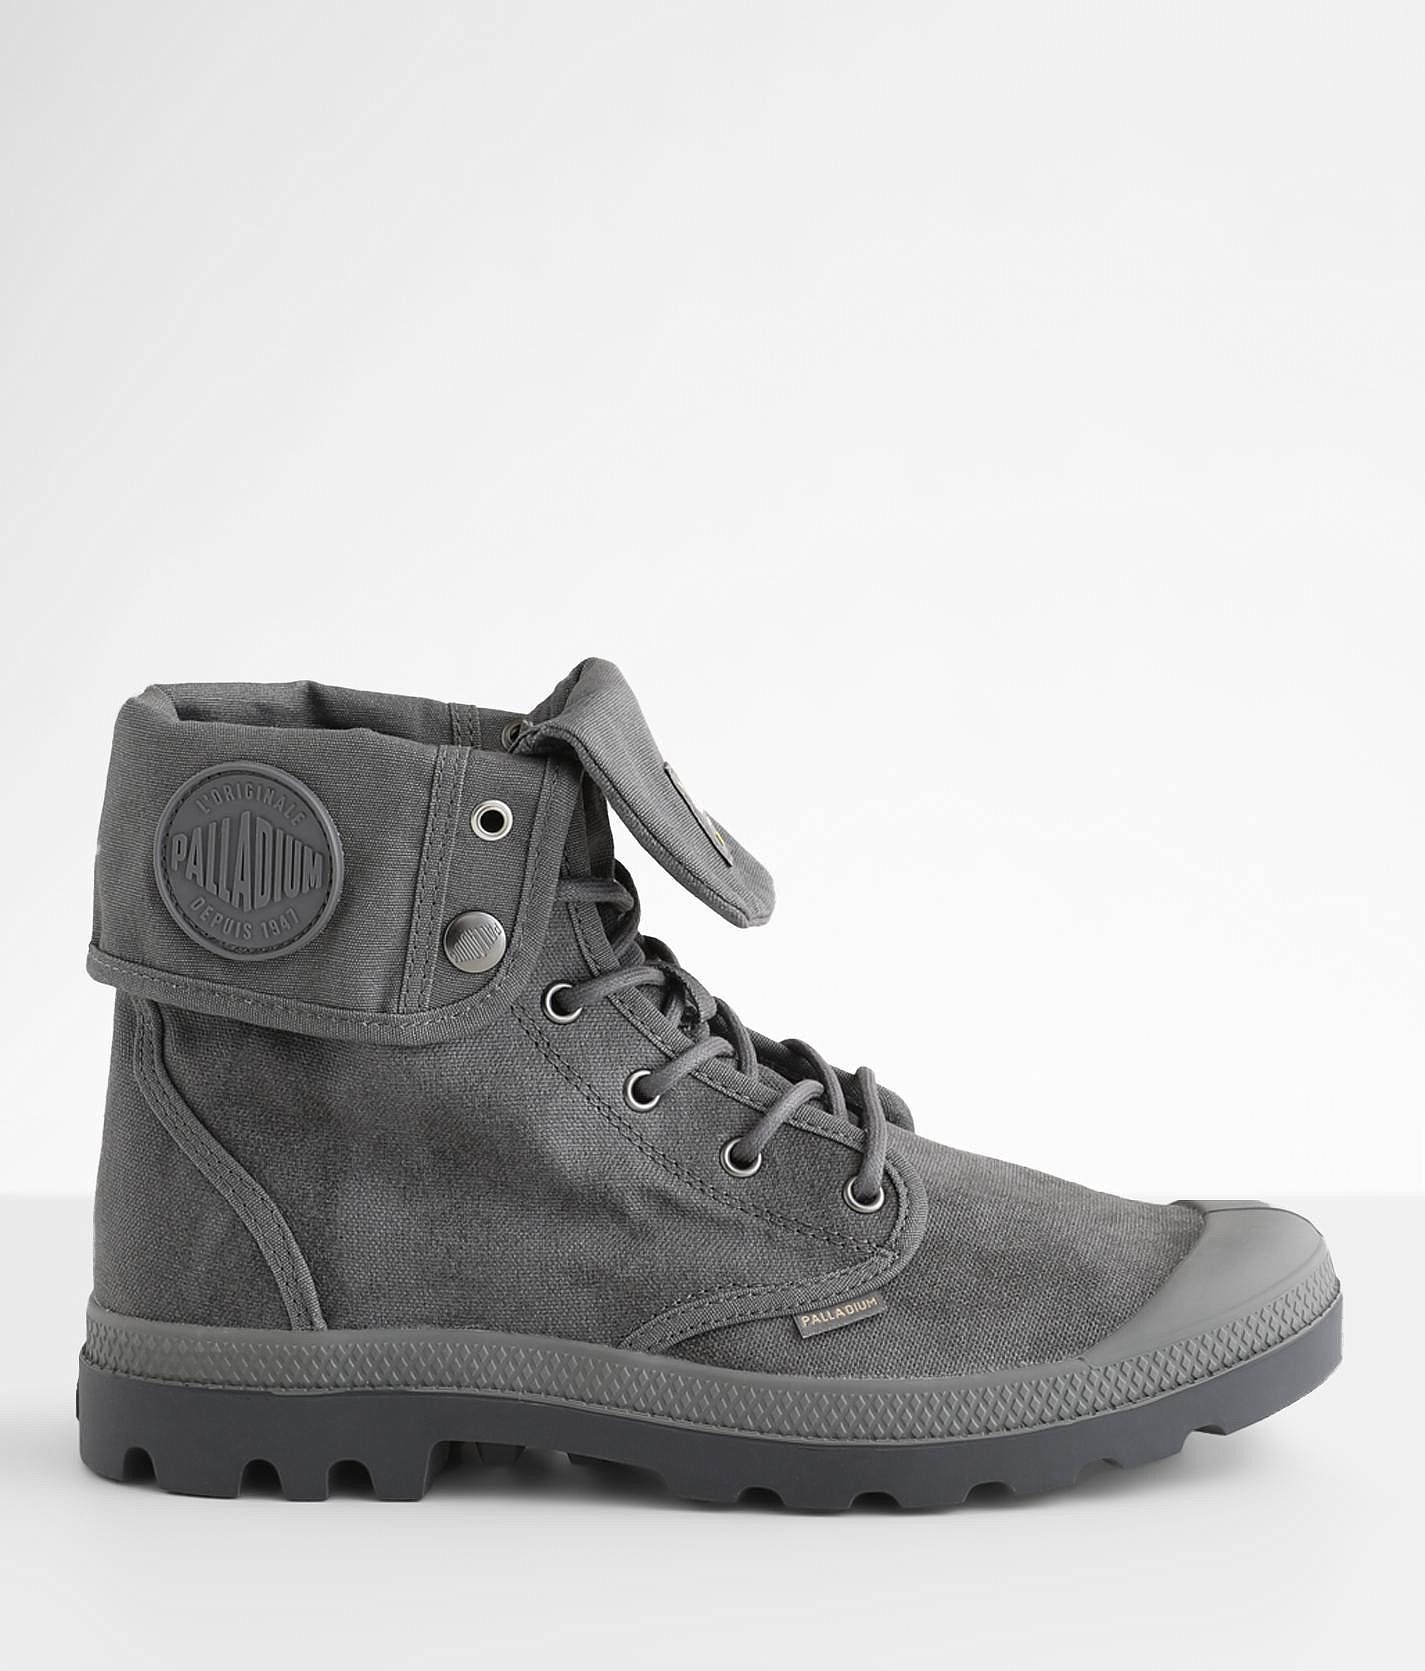 Indigenous Fordi Hæl Palladium Pampa Baggy Wax Boot - Men's Shoes in French Metal | Buckle